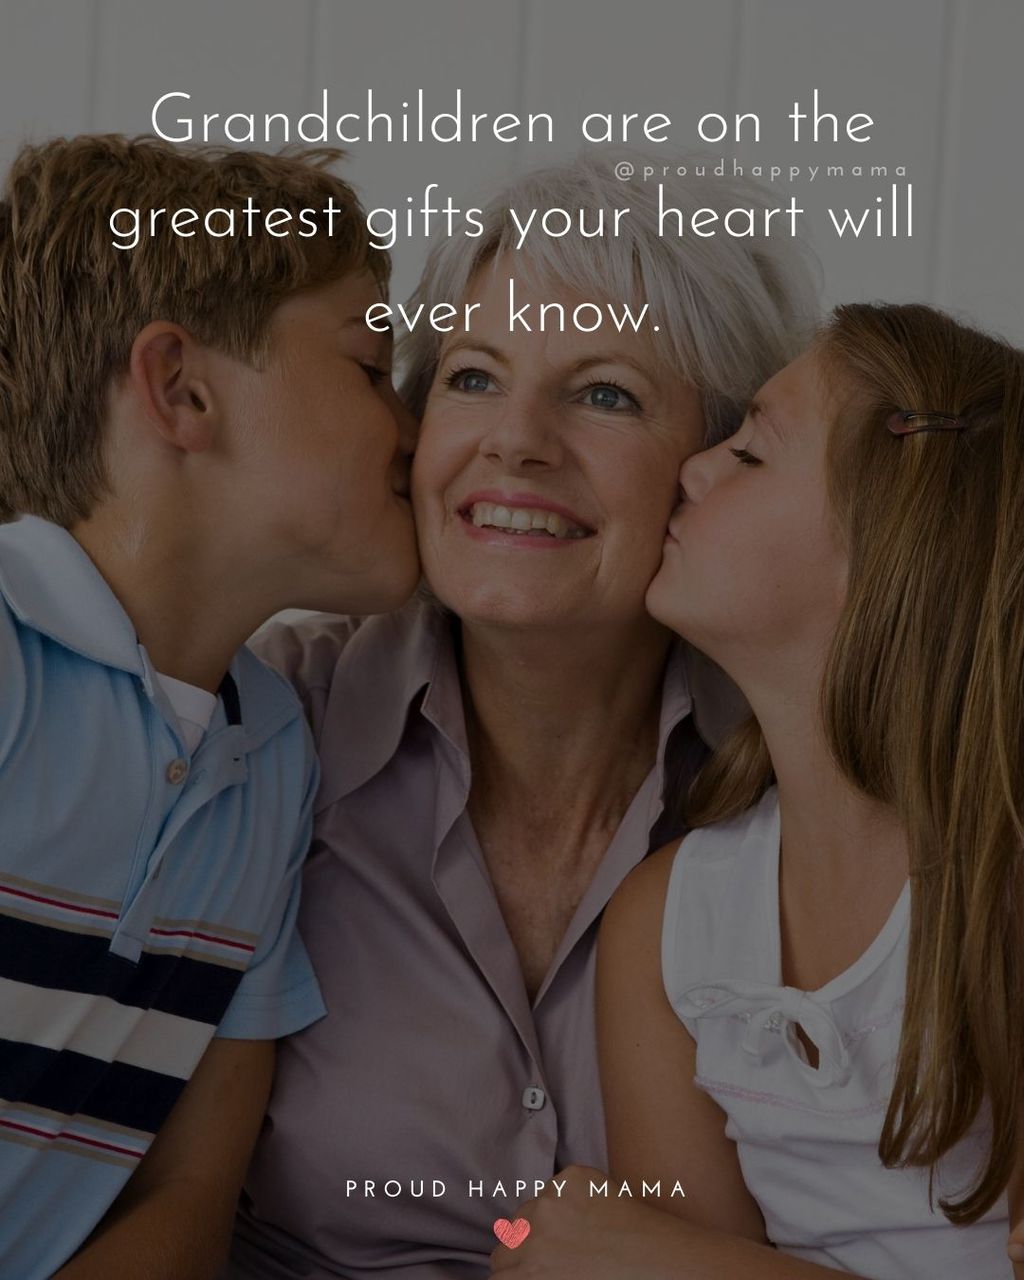 Quotes for Grandchildren - Grandchildren are on the greatest gifts your heart will ever know.